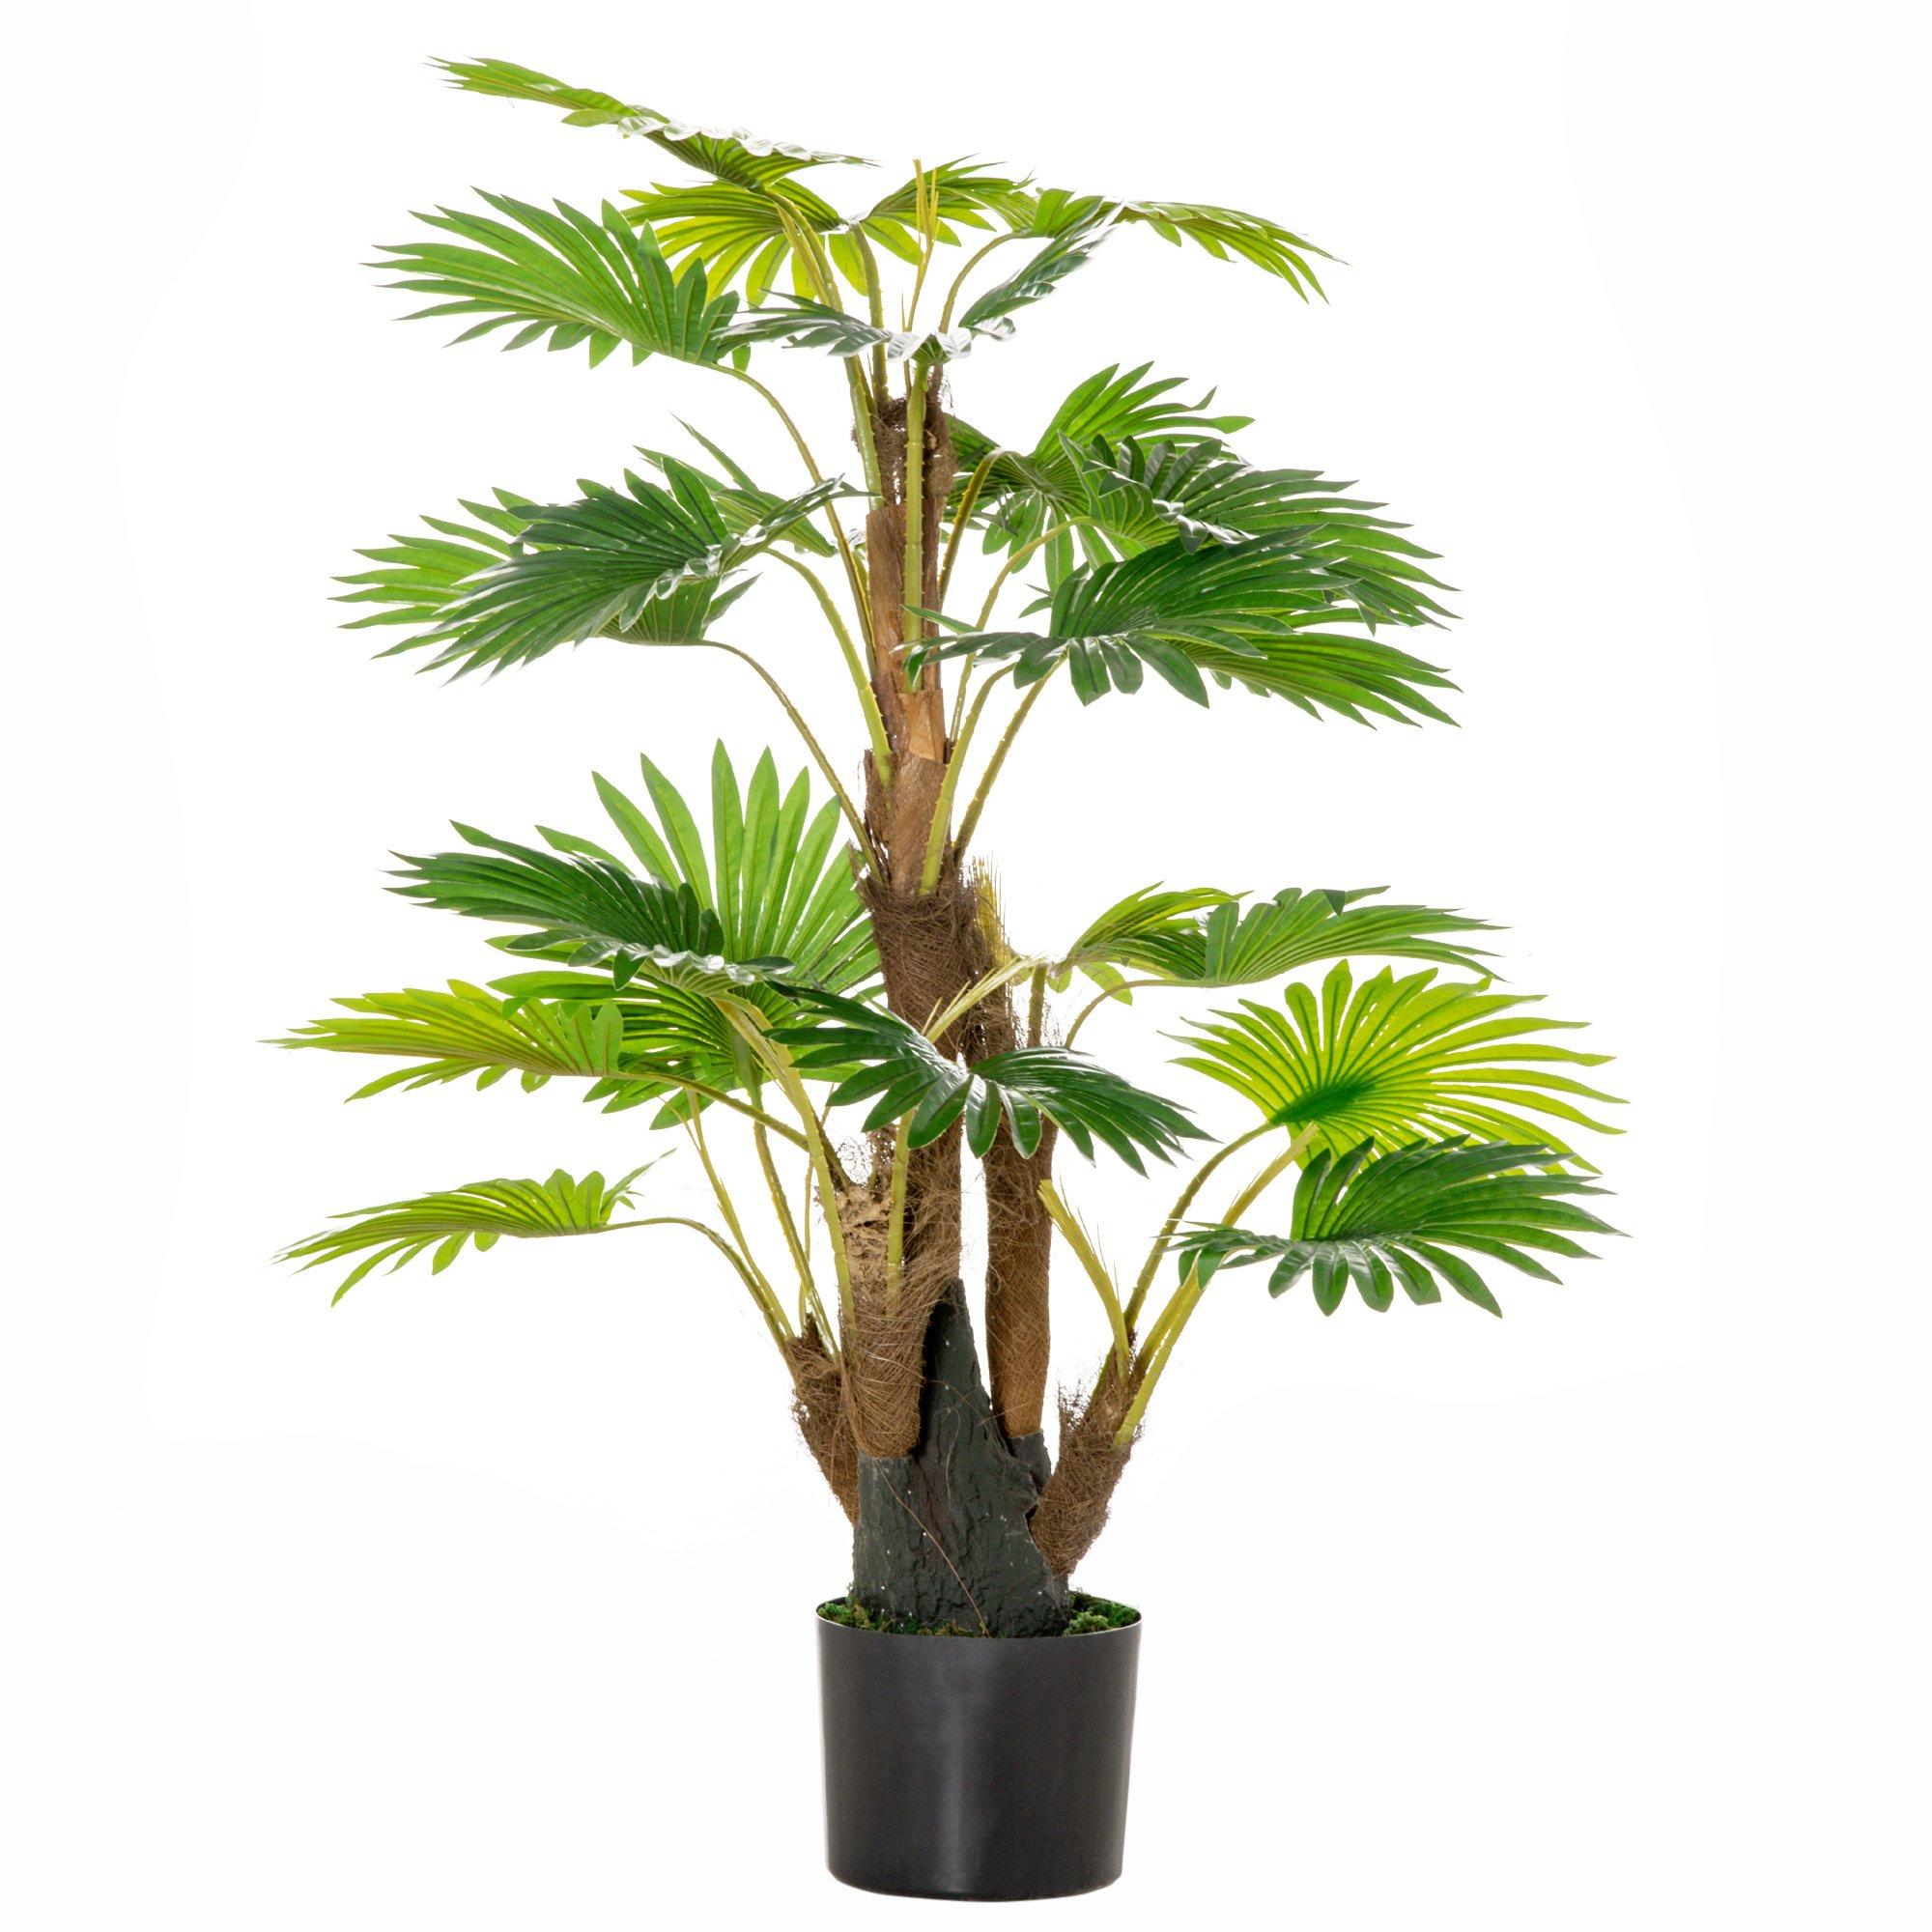 Artificial Palm Plant Realistic Fake Tropical Tree Potted Home